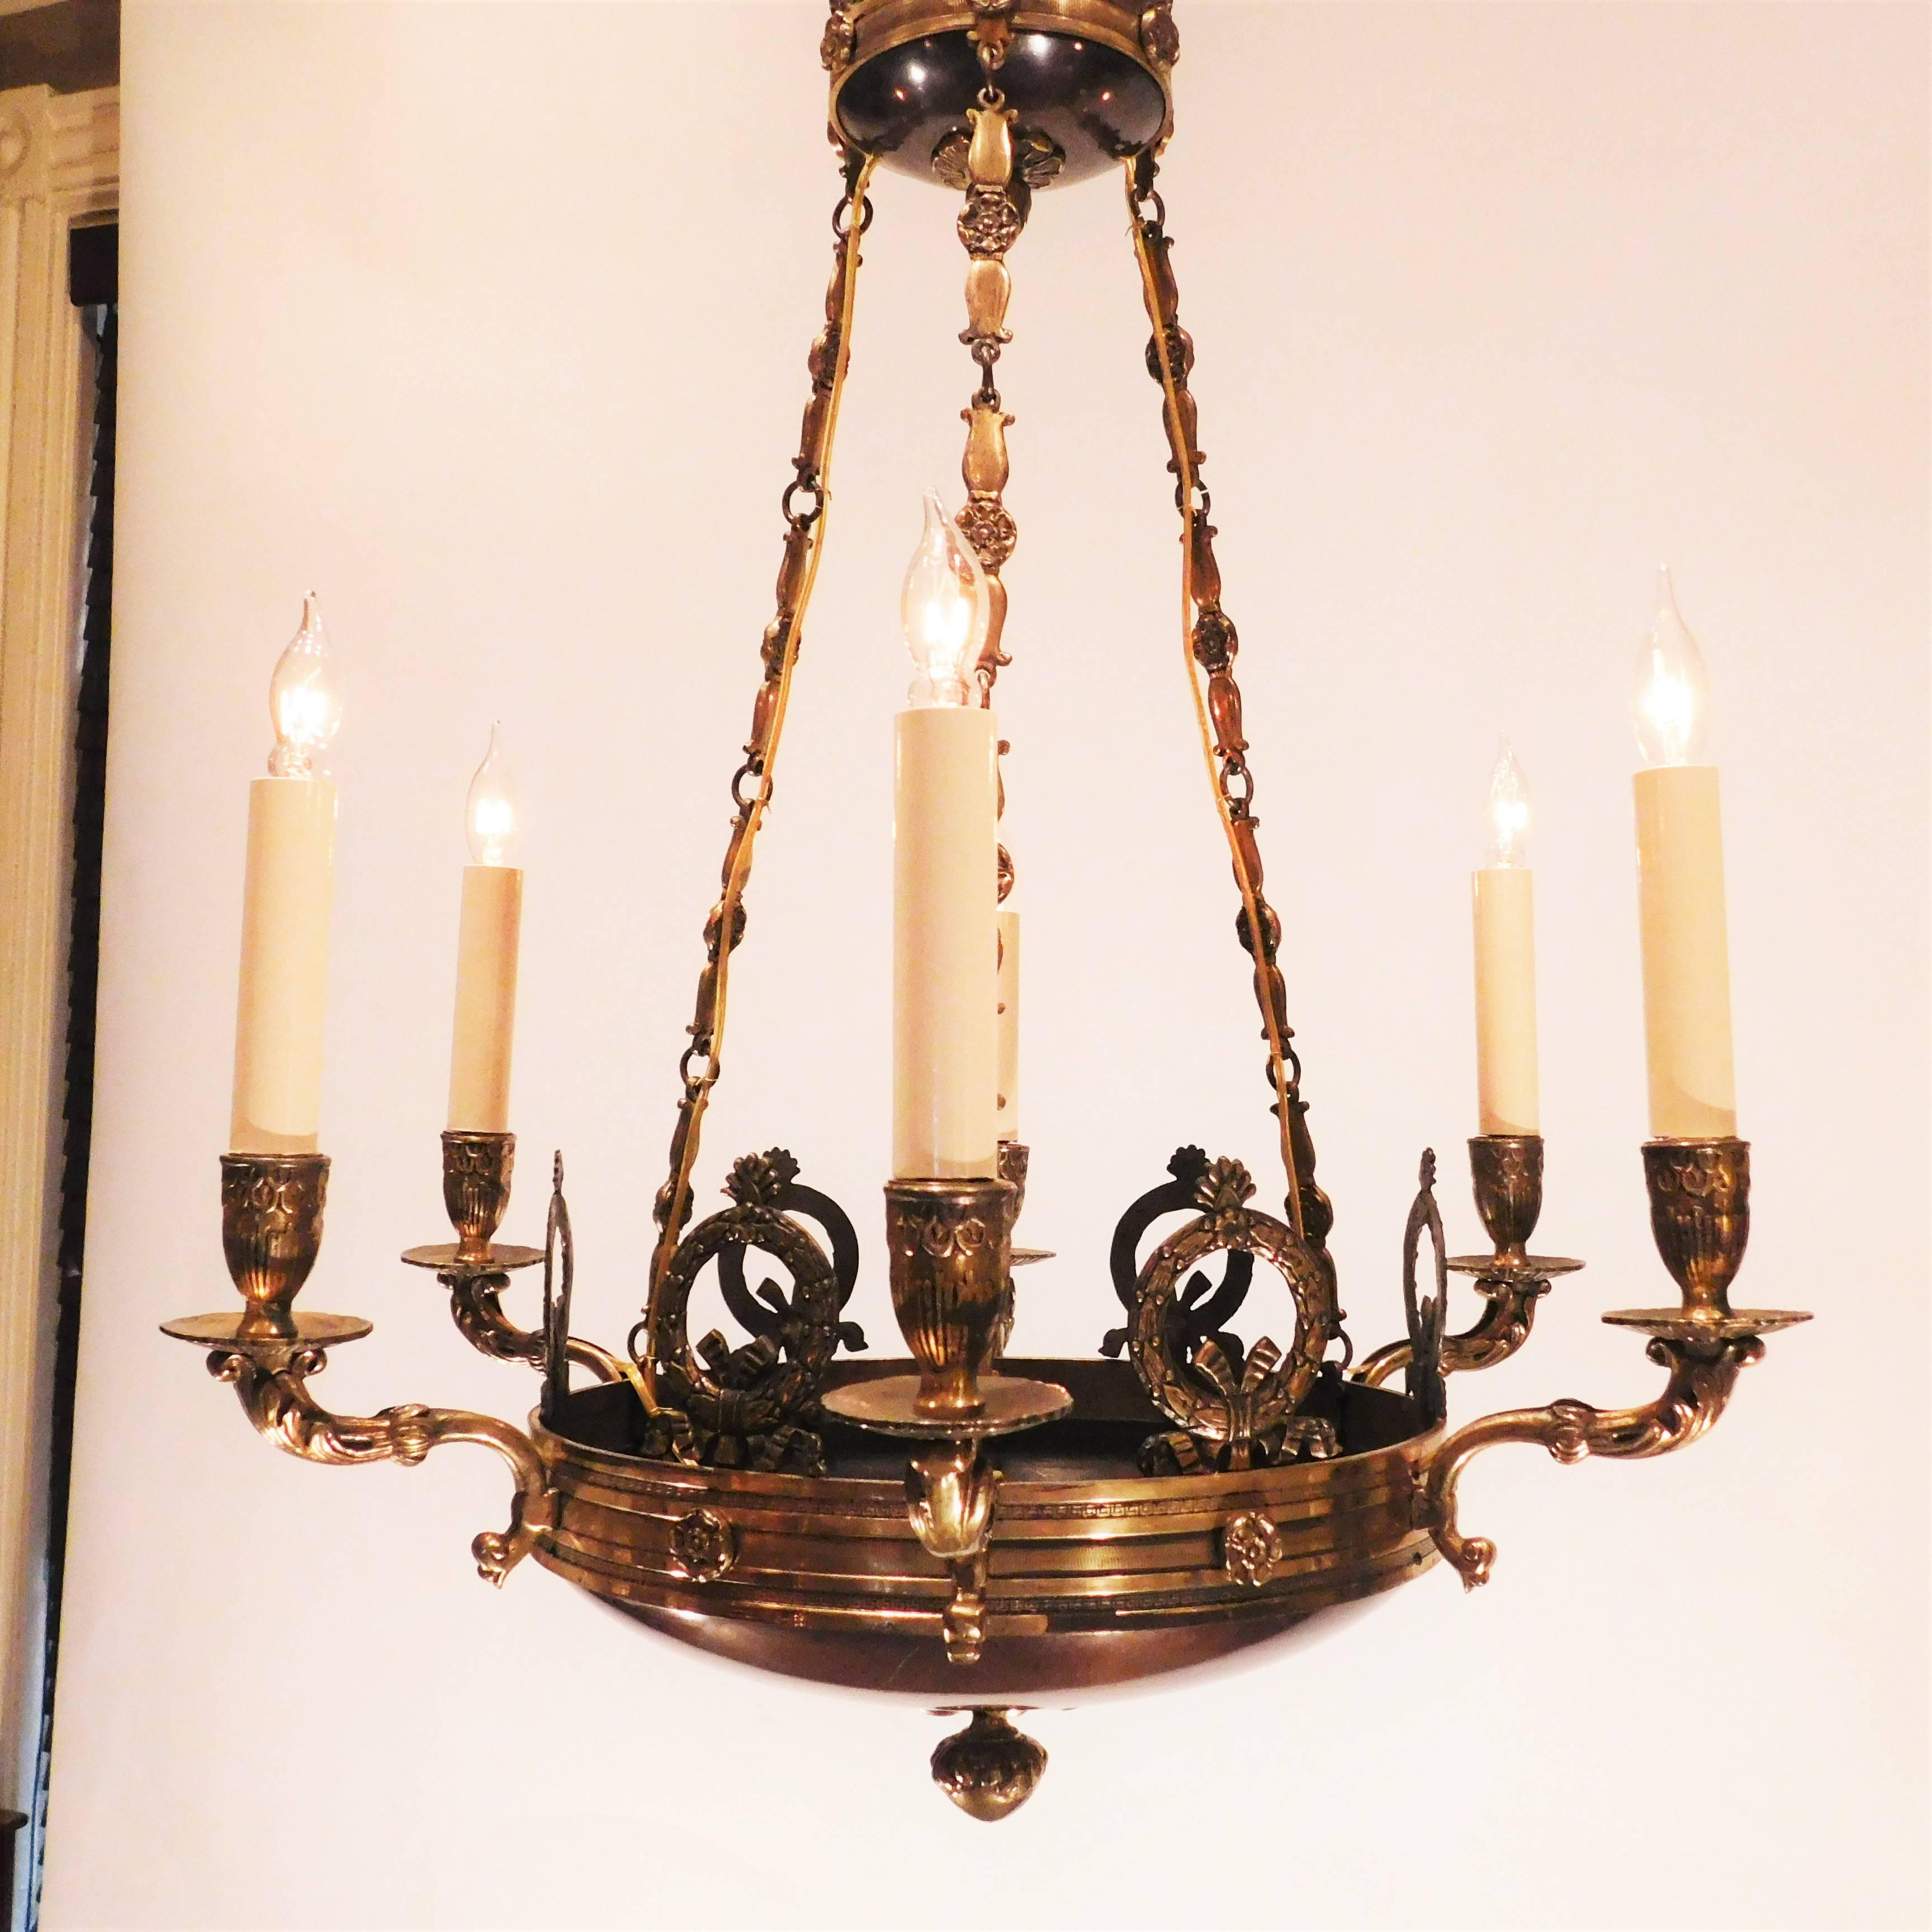 Beautiful mellow patina on the hand cast brass, main bowl and bottom of crown are a rich deep bronze color and quite reflective original chain connecting base and crown has unusual design, can be shortened by removing a link. Ceiling cap, hanging